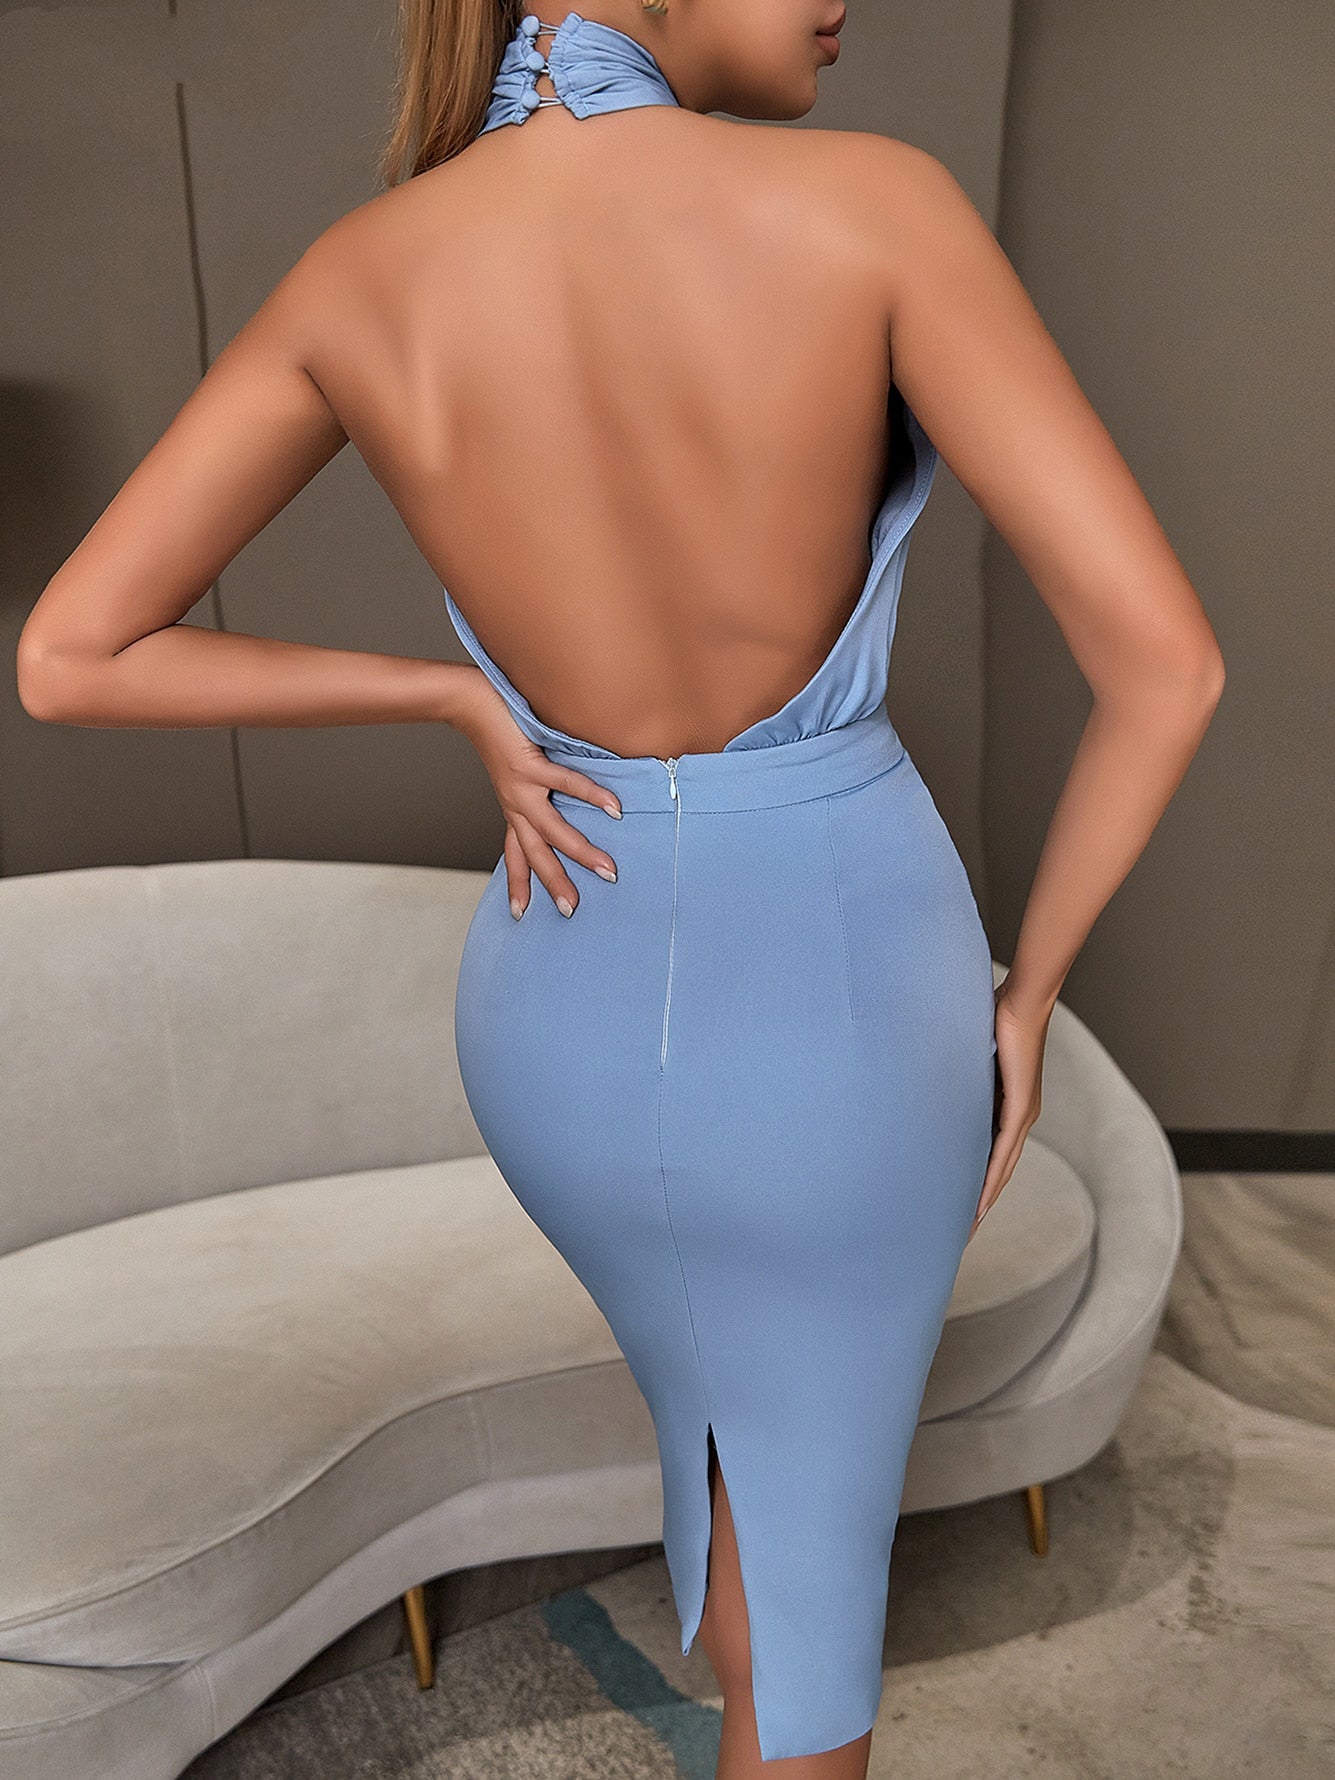 New Summer Backless Halter Hollow Out Dress Women Sexy Sleeveless Fashion Blue Celebrity Evening Runway Party Dresses